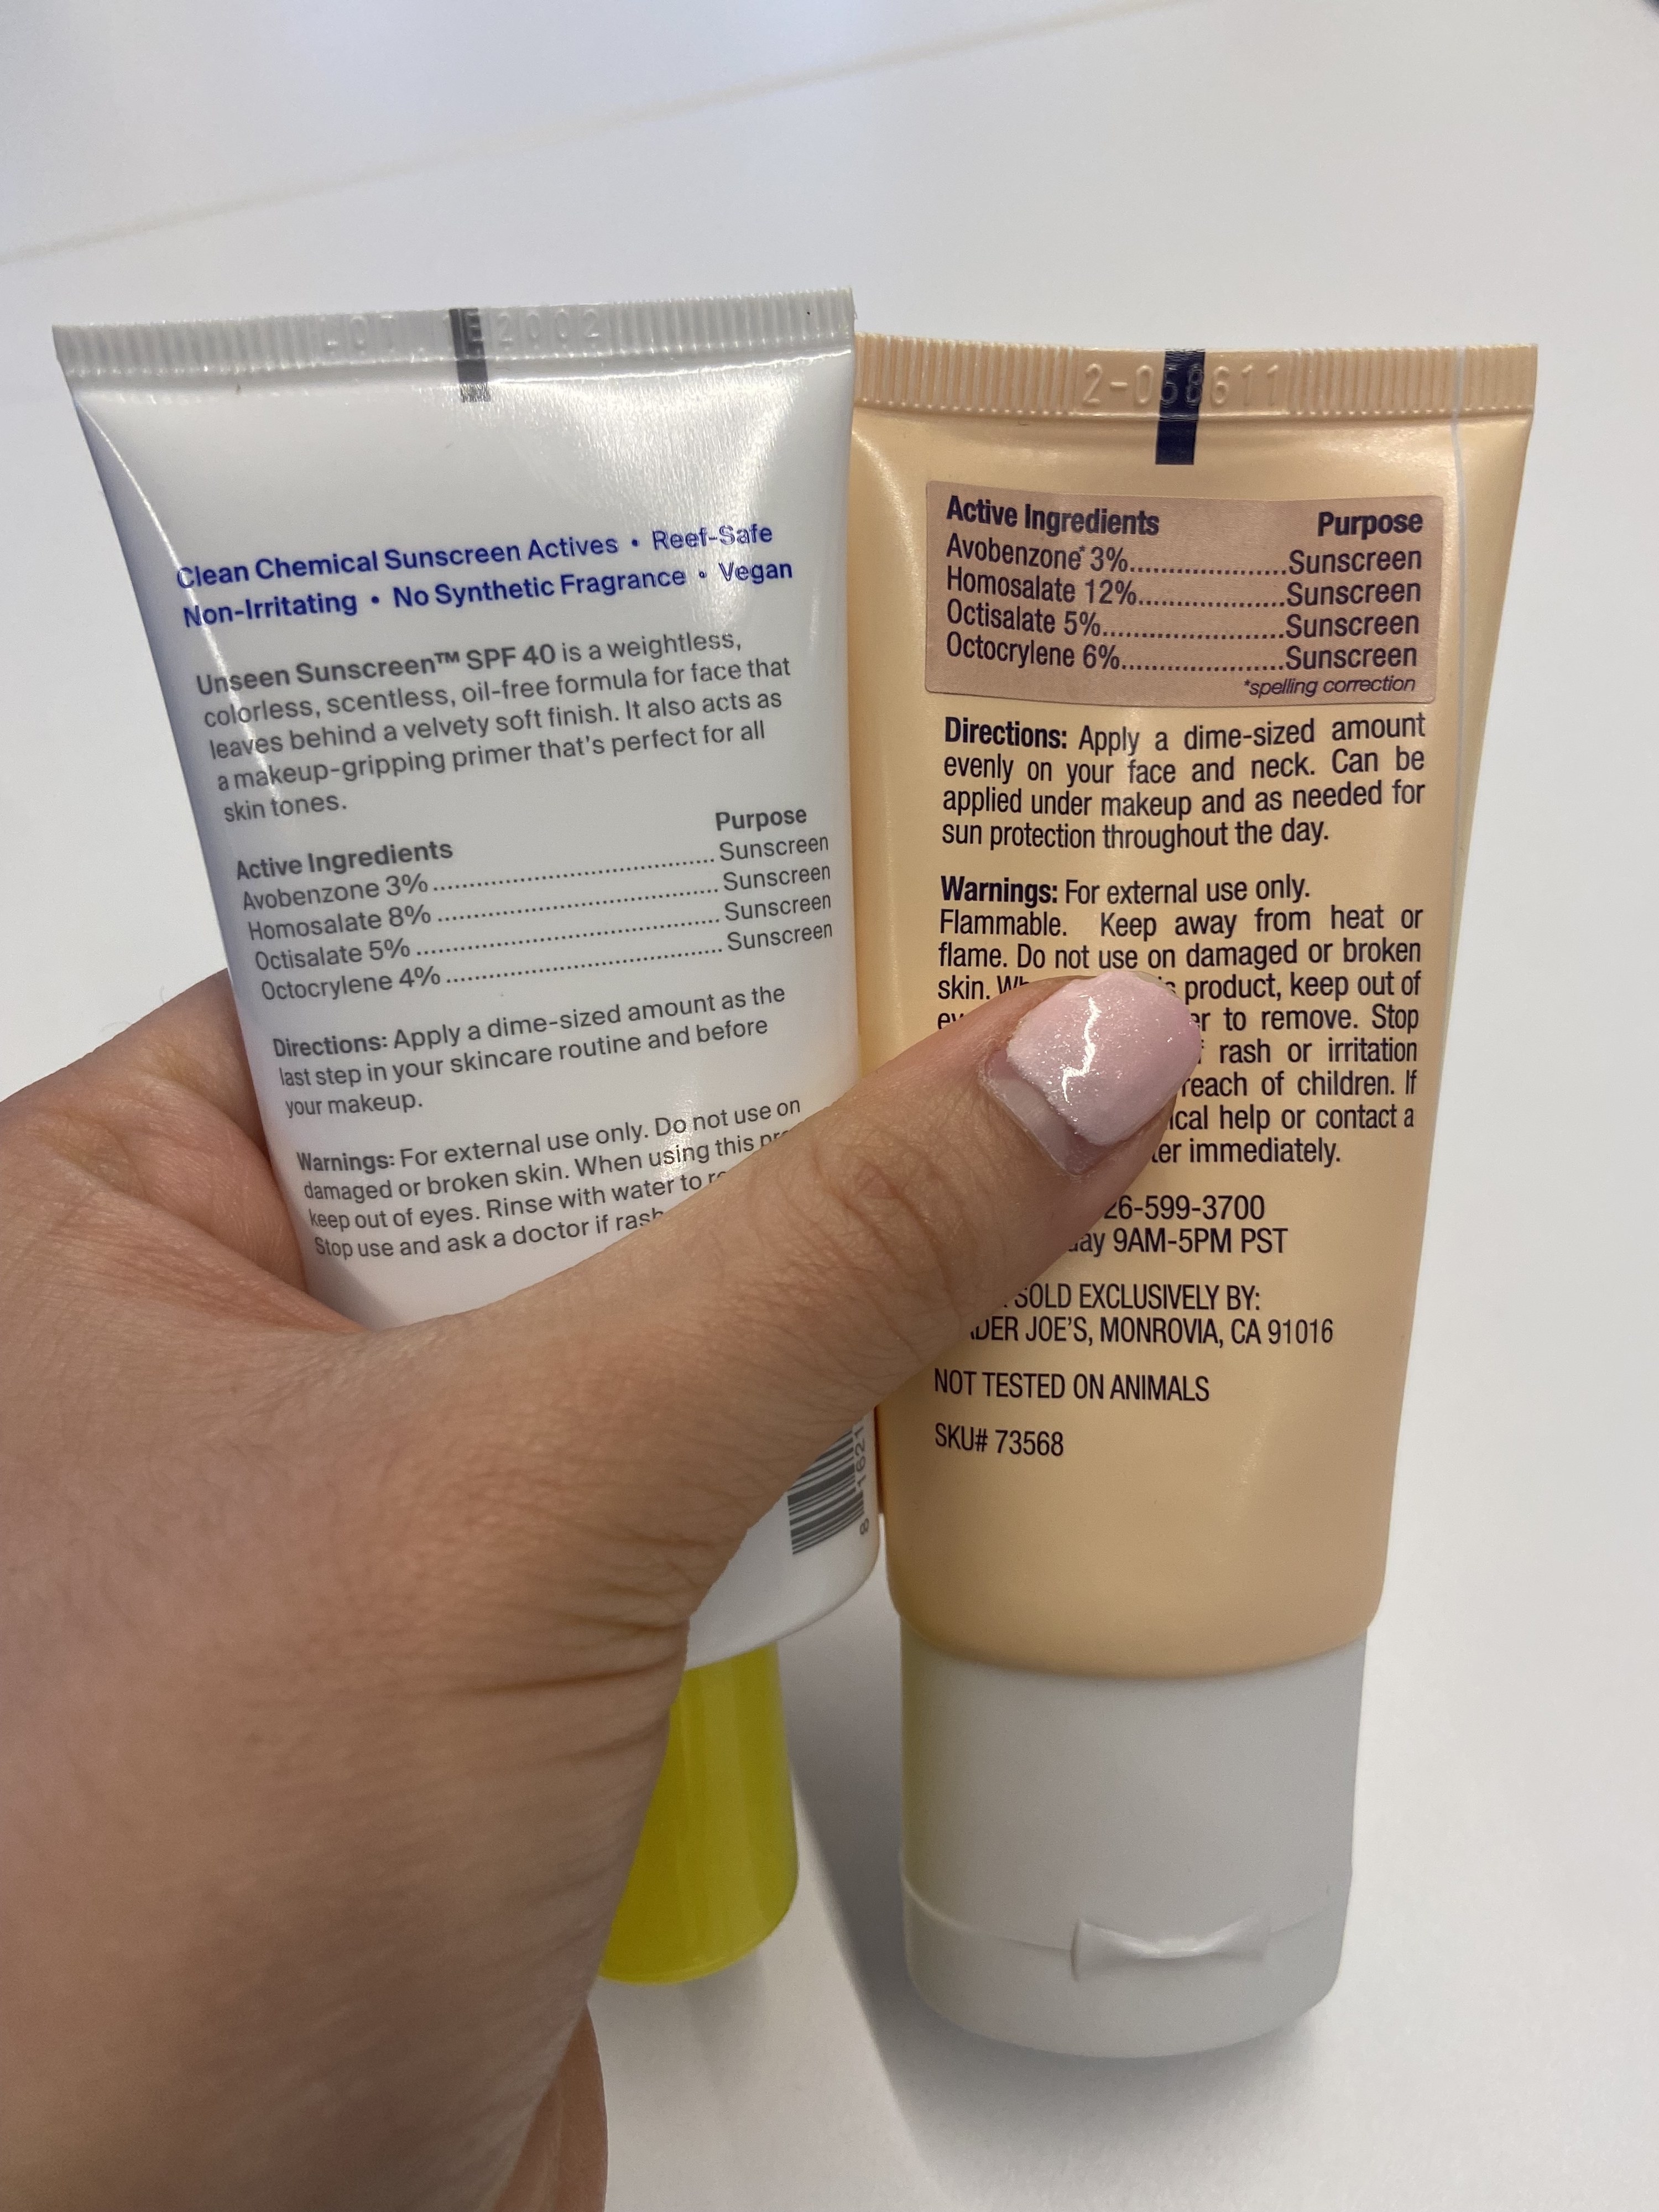 The writer holding both bottles side-by-side to show the ingredients list on the back